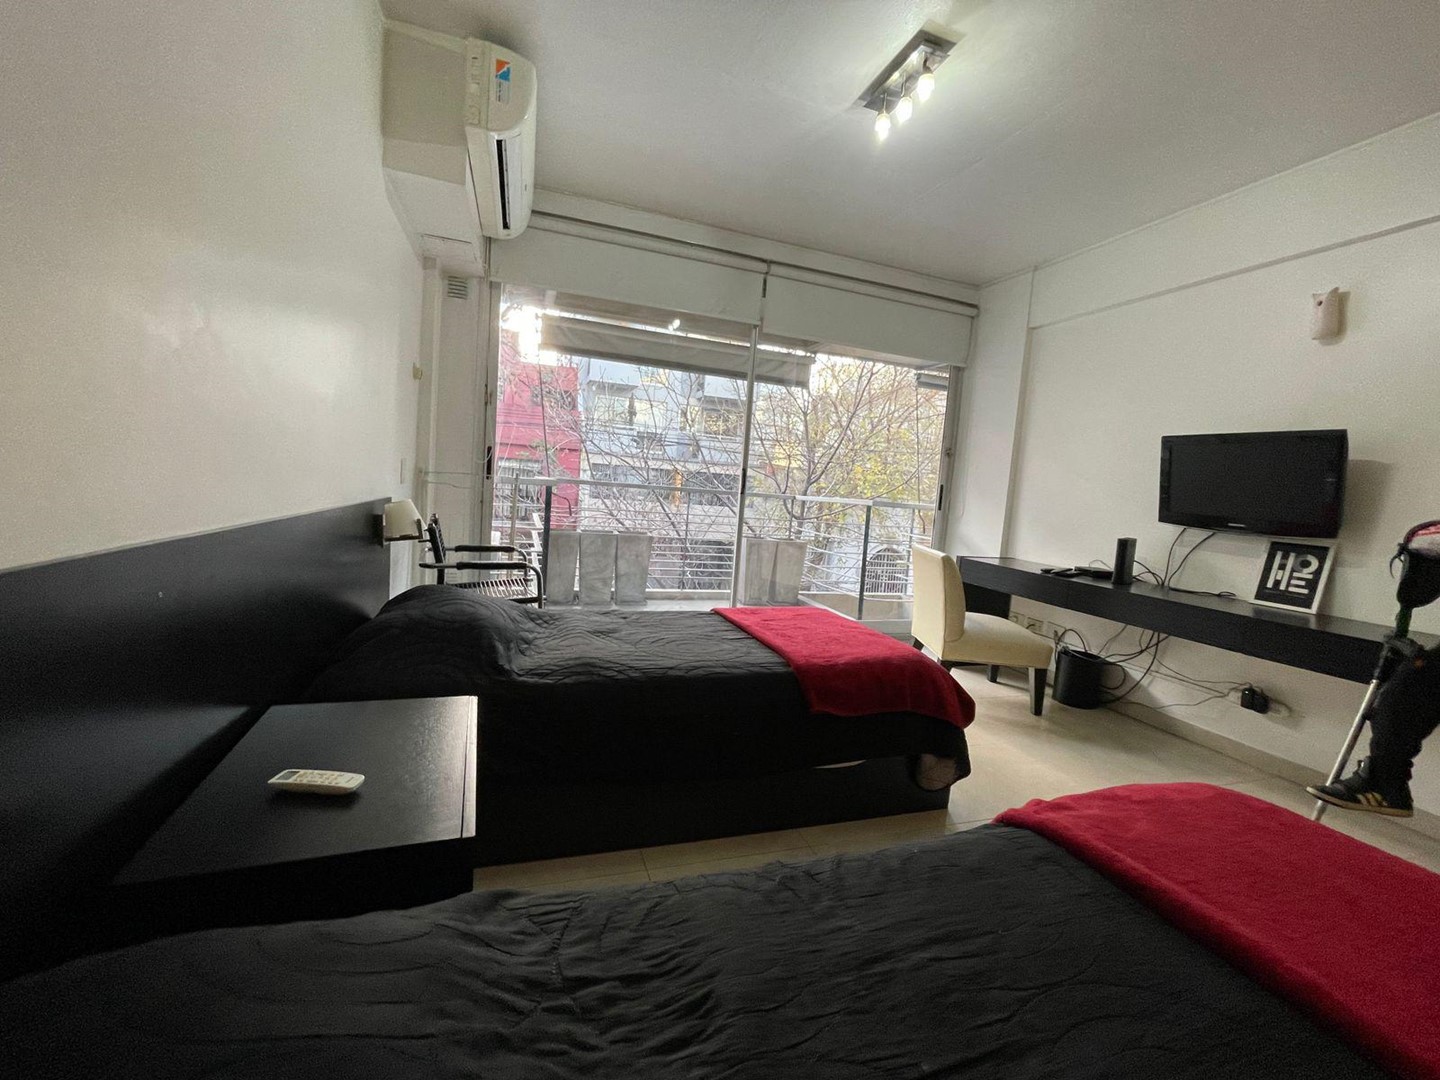 #5023537 | Alquiler Temporal | Departamento | Palermo Hollywood (Selling Sunset)